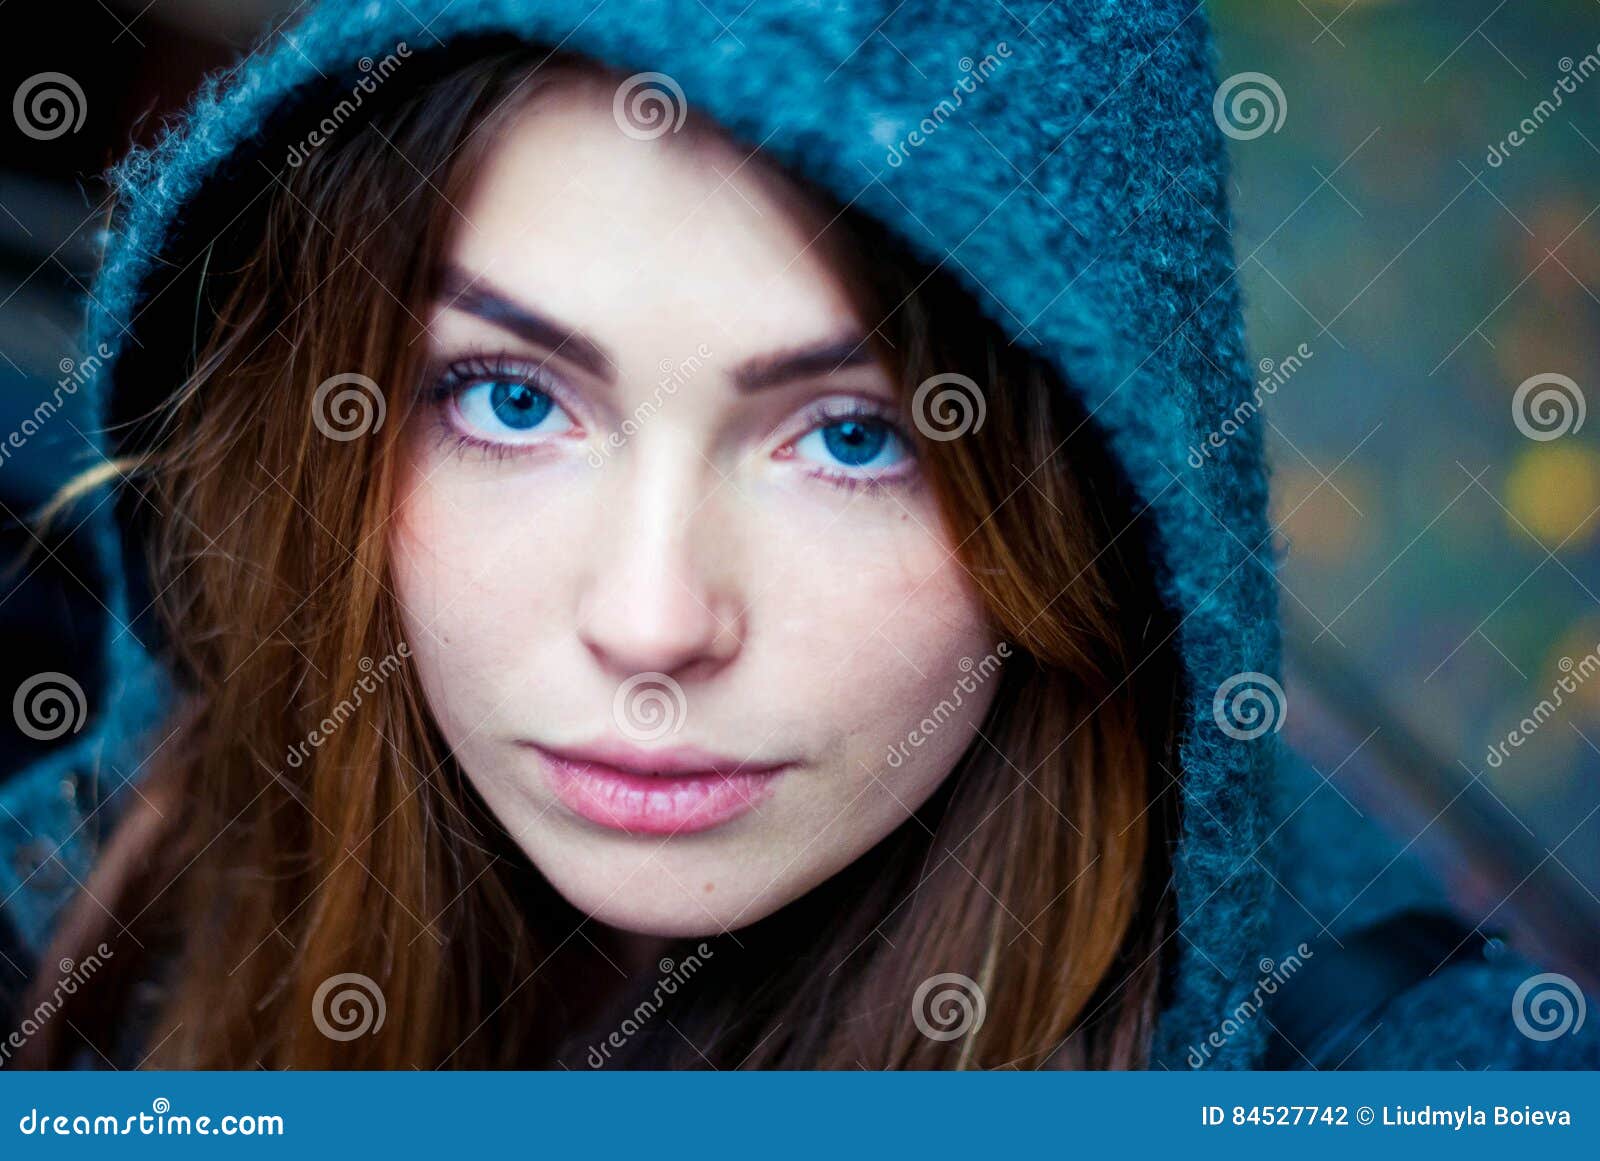 Calm Girl with Blue Eyes in the Hood. Stock Photo - Image of quiet ...